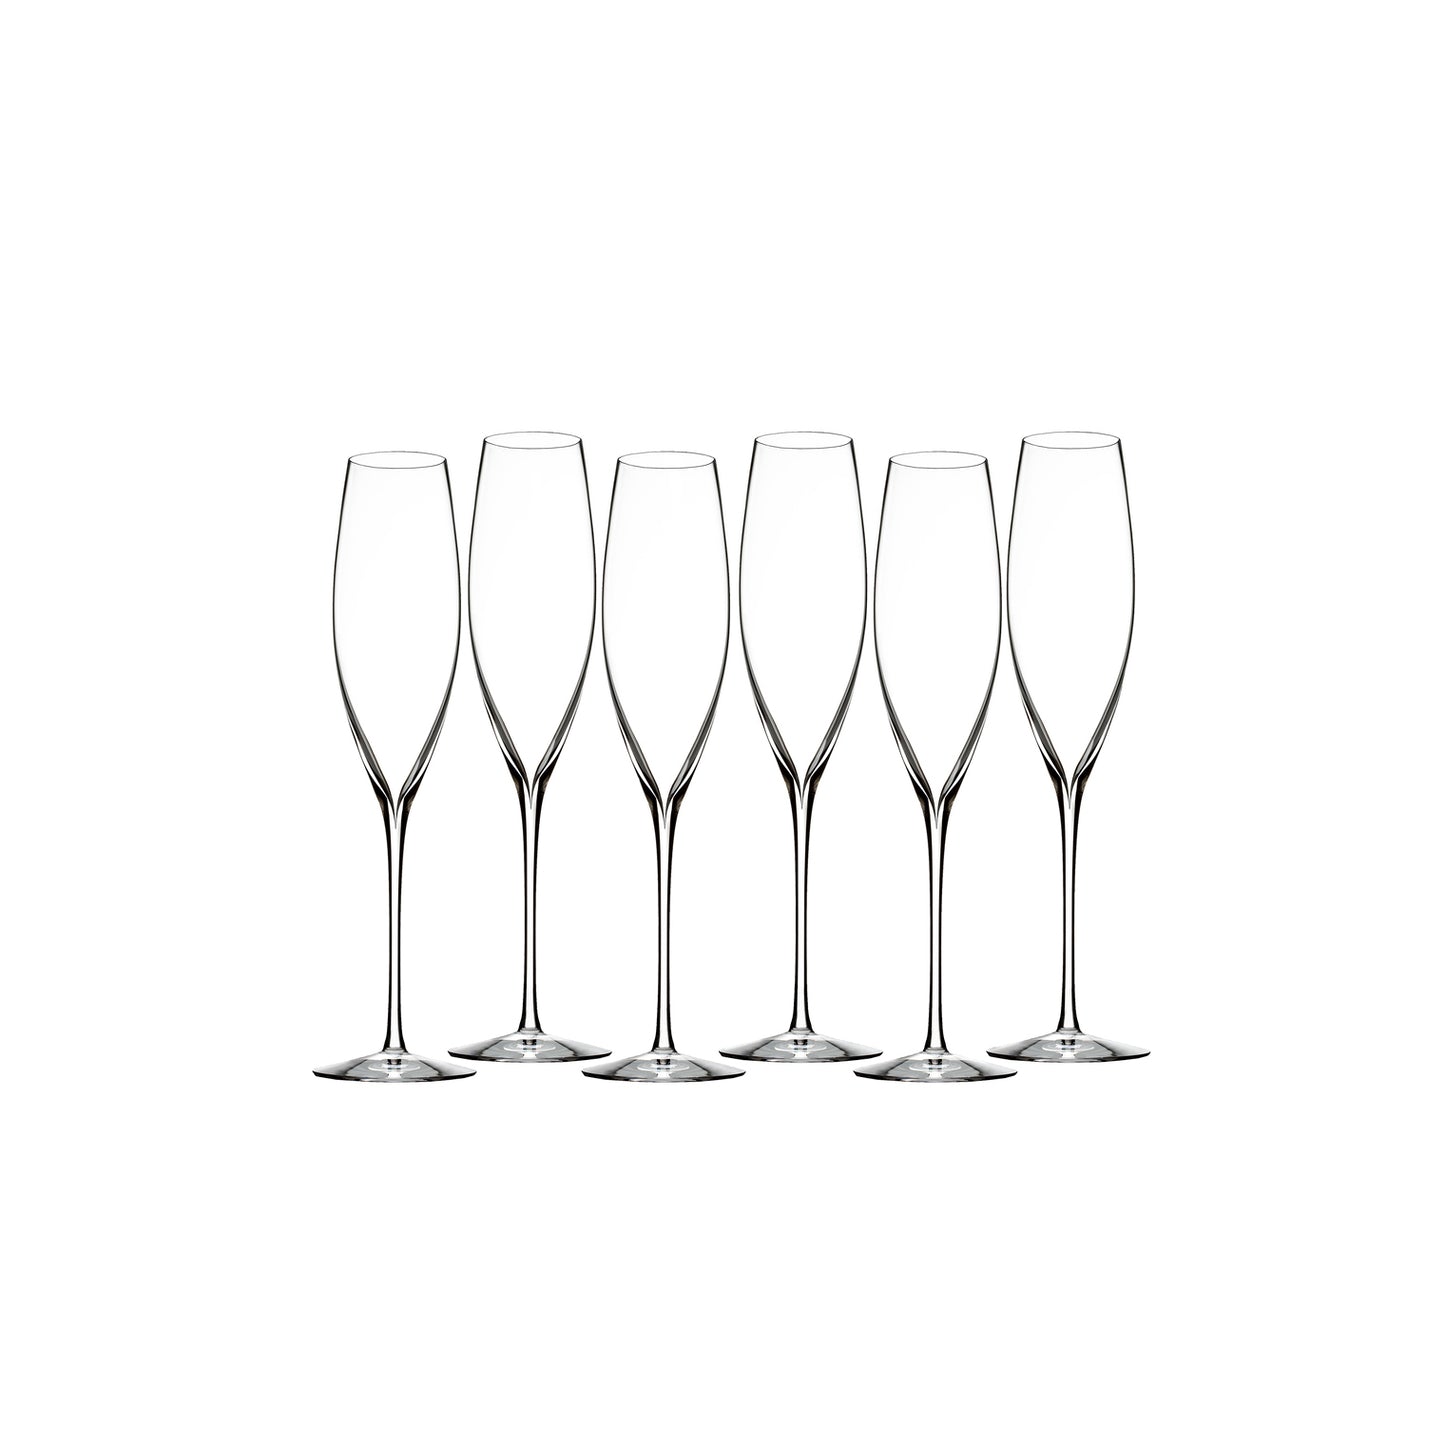 Waterford Crystal Elegance Champagne Classic Flute Set of 6